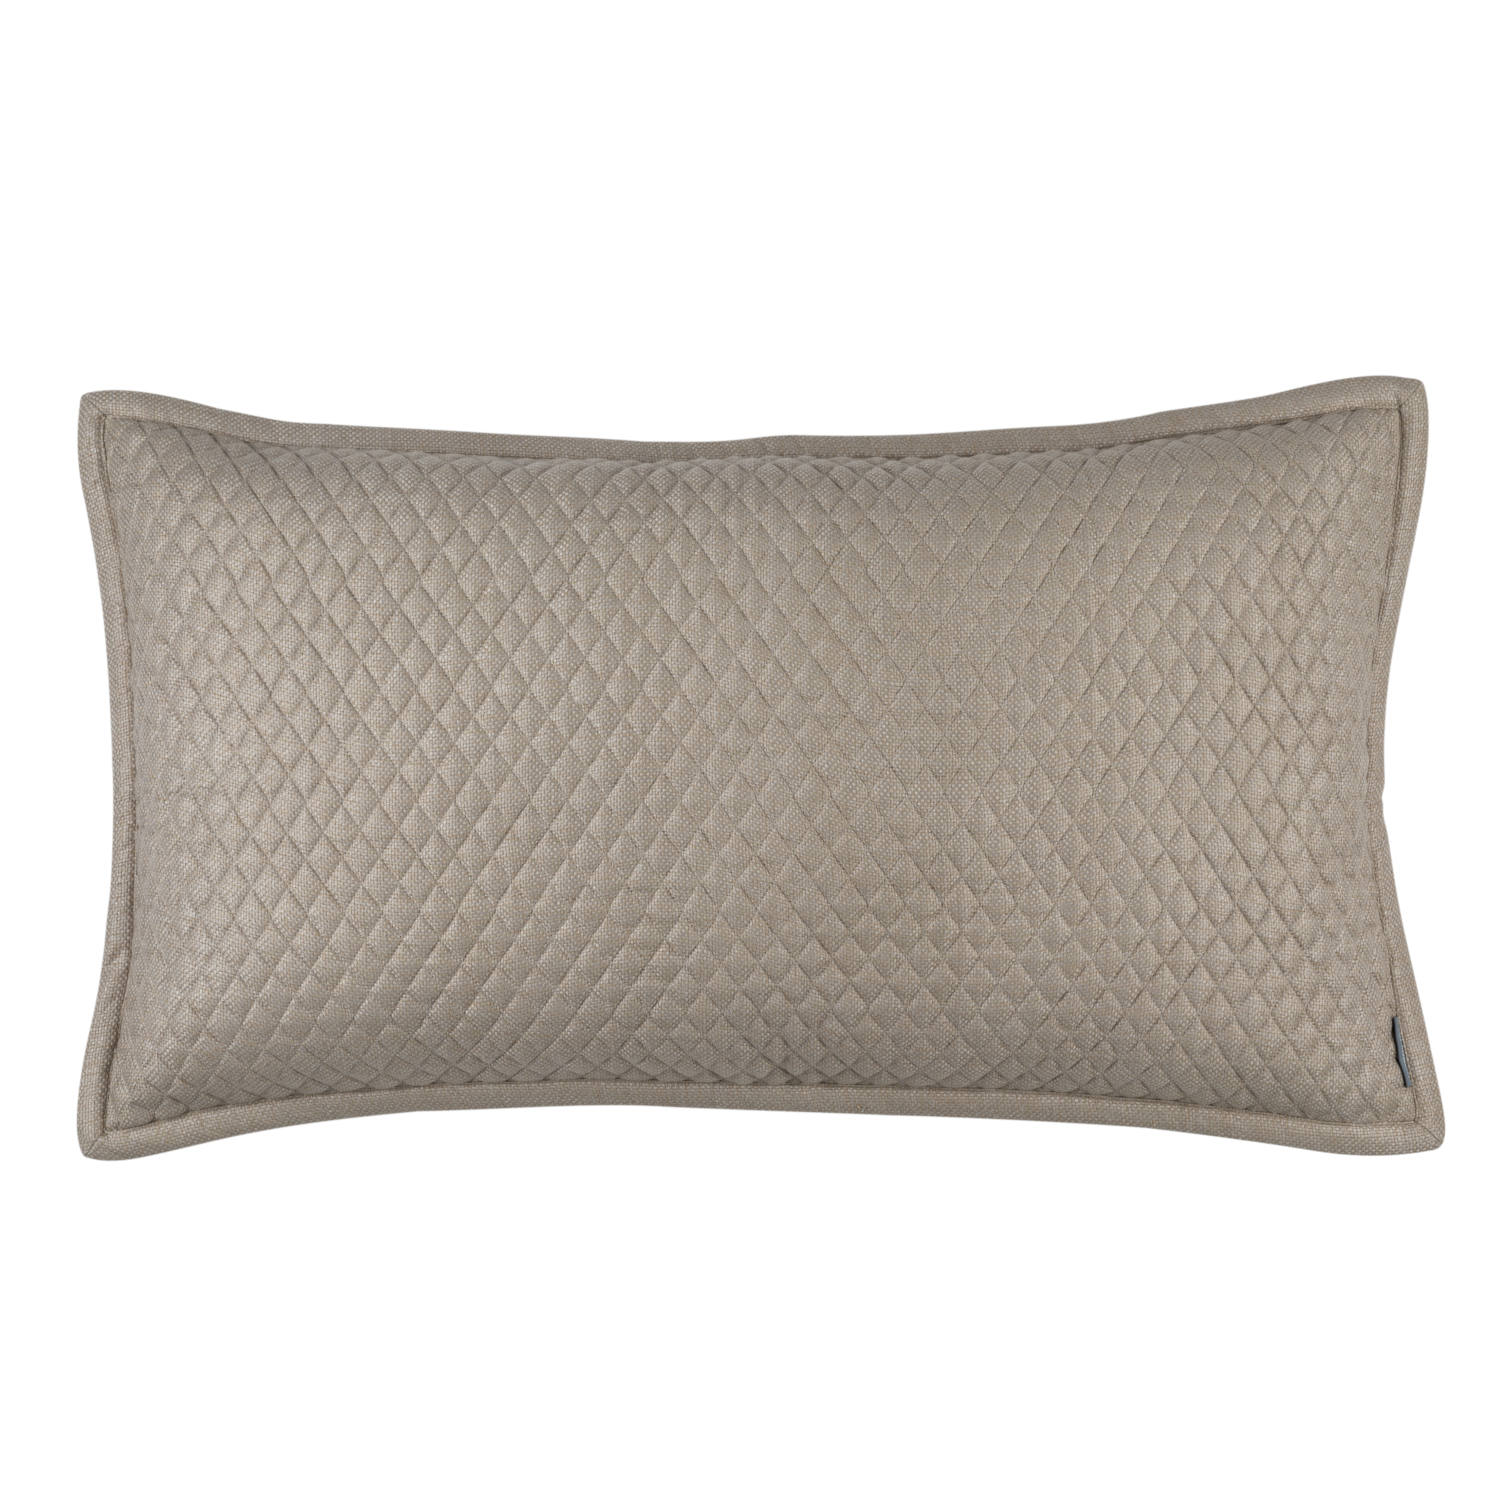 Lili Alessandra Laurie Quilted and Solid Stone Bedding